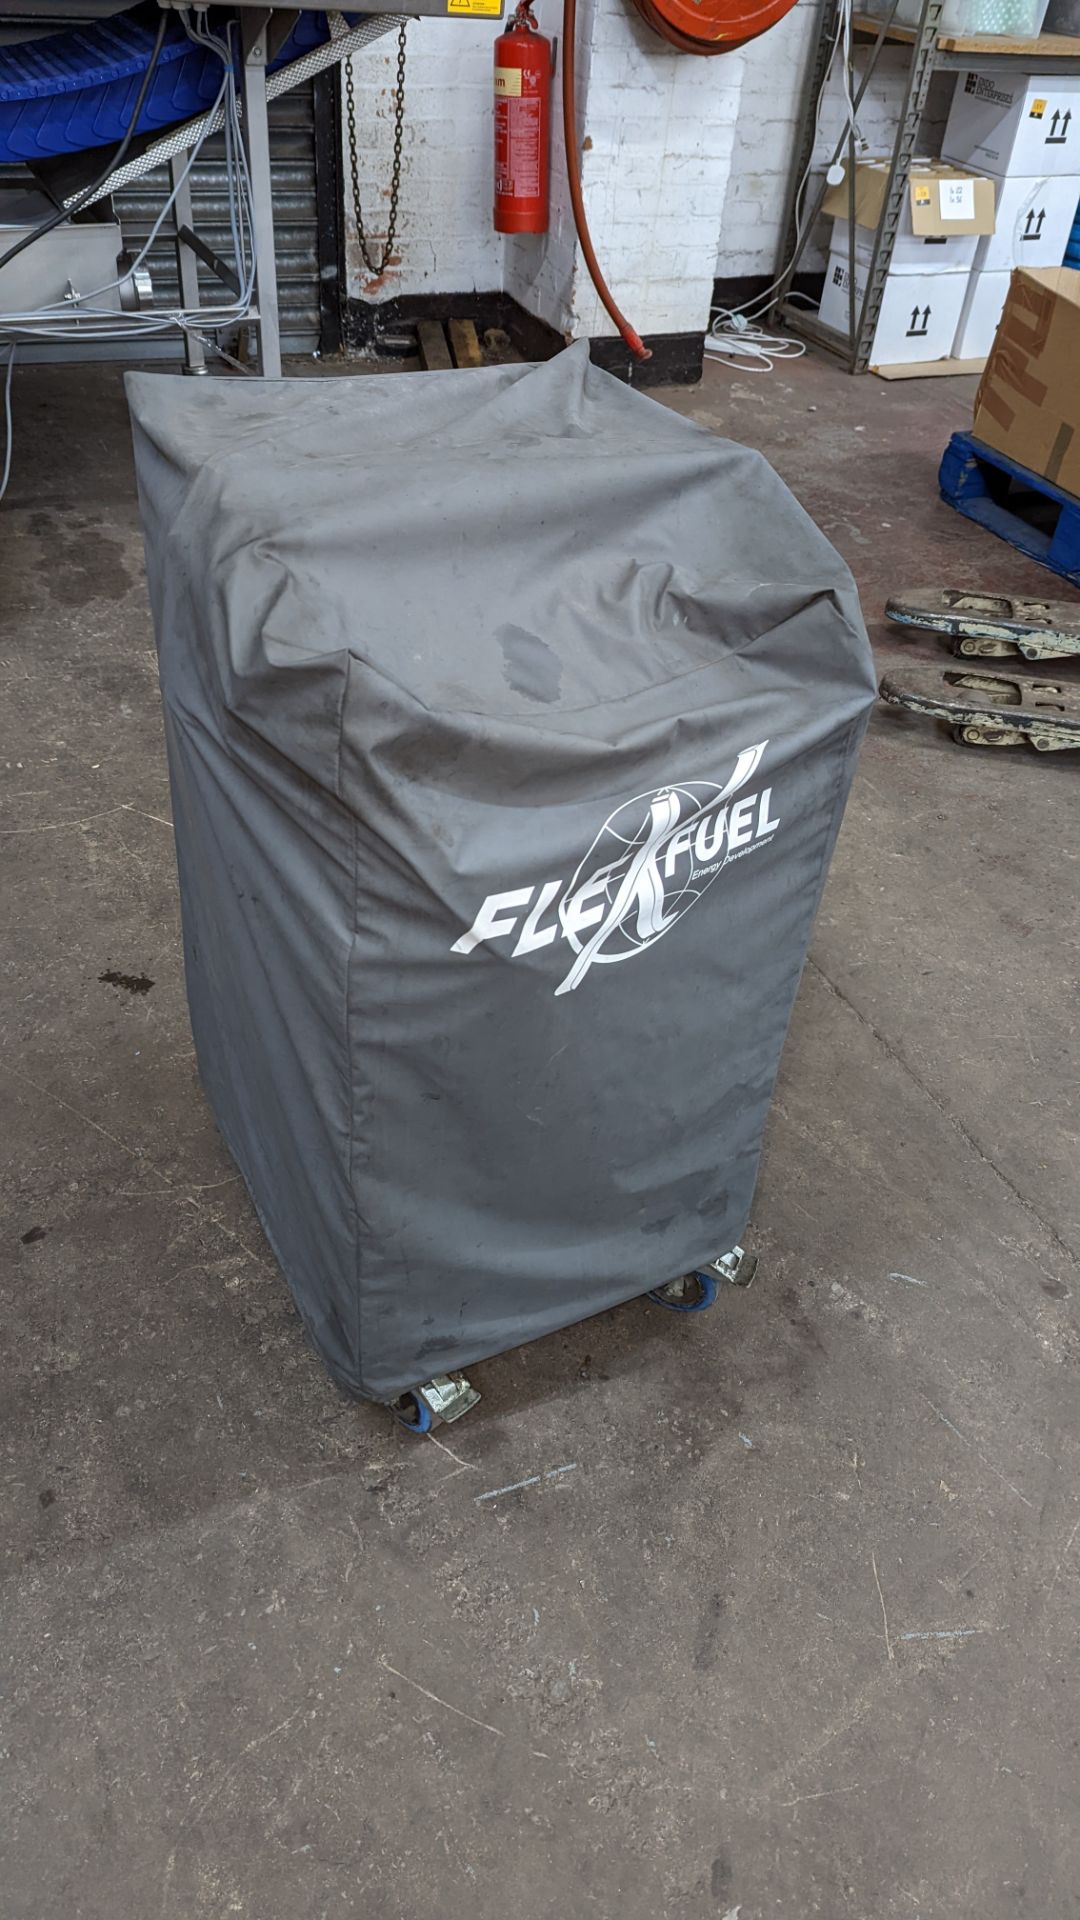 Flex Fuel Hy-Carbon EGR Pilot 1000S engine cleaning machine including cover. Purchased new in 2019 - Image 13 of 19